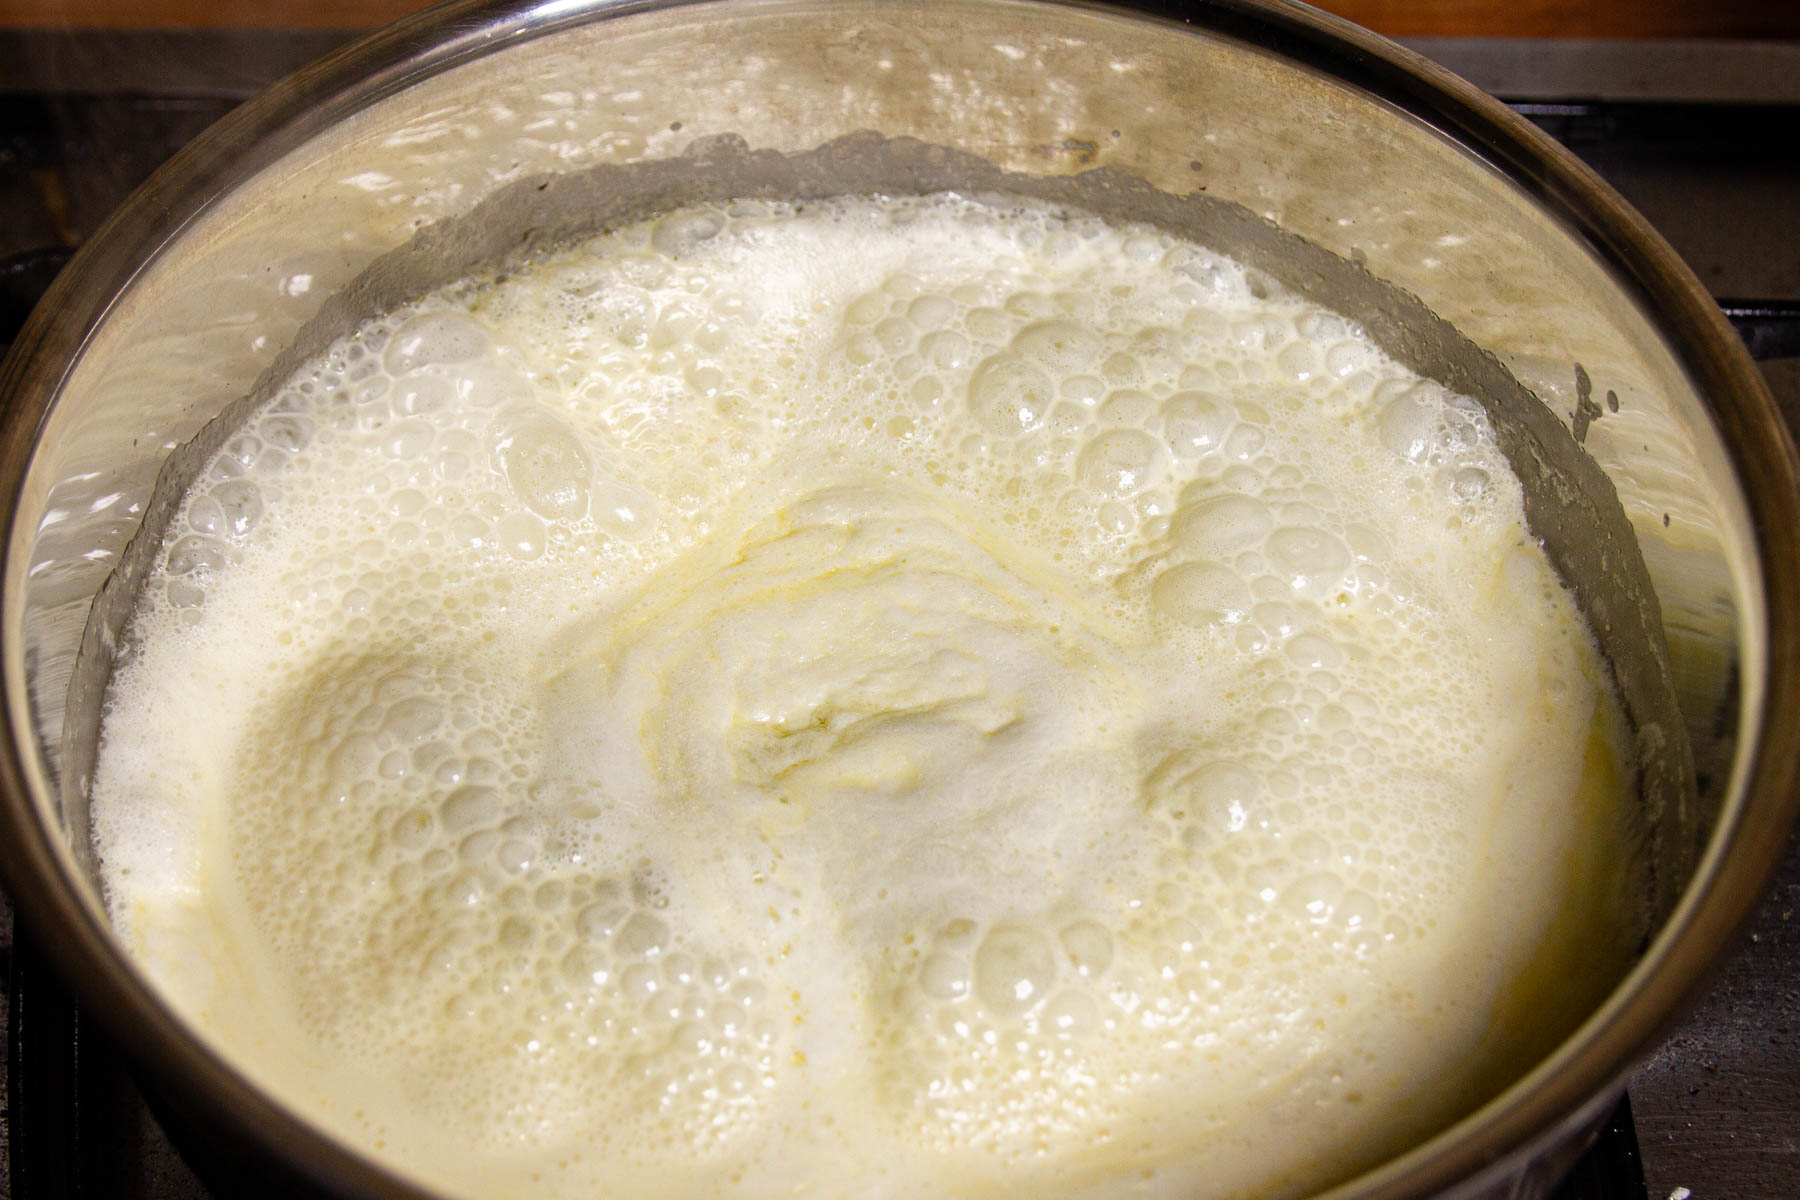 Heating the cream and butter together in a pan.